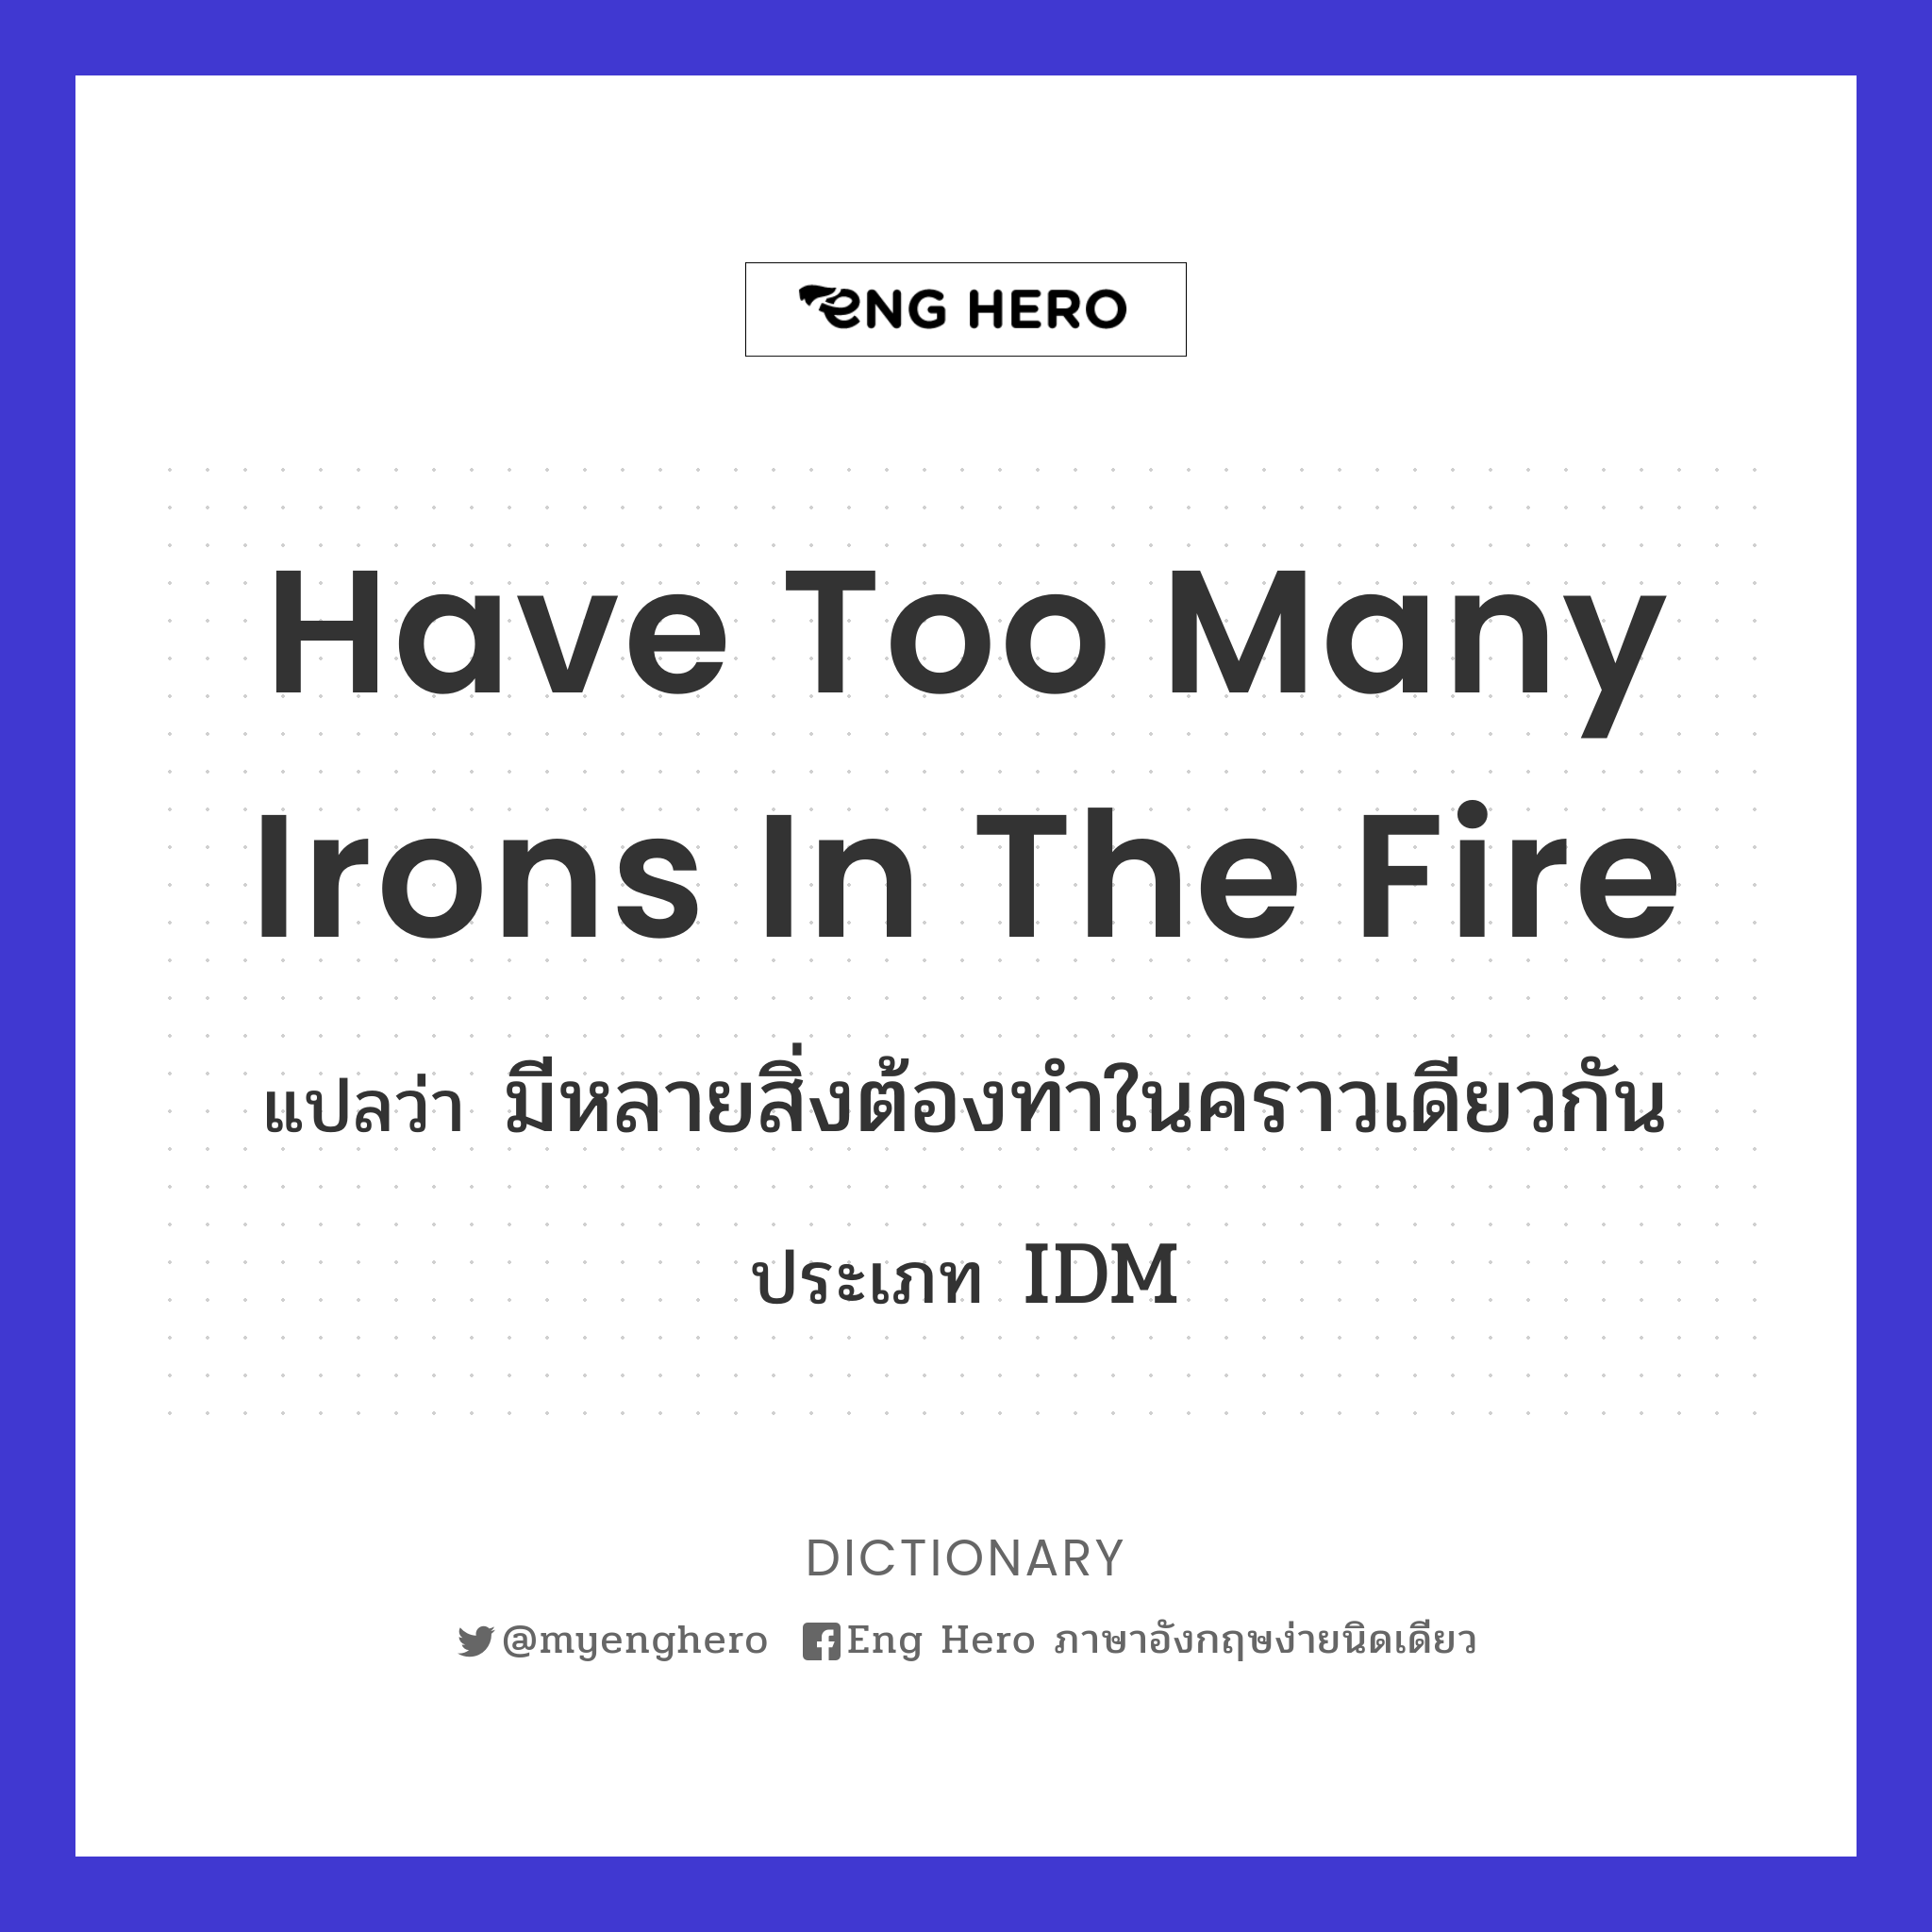 have too many irons in the fire